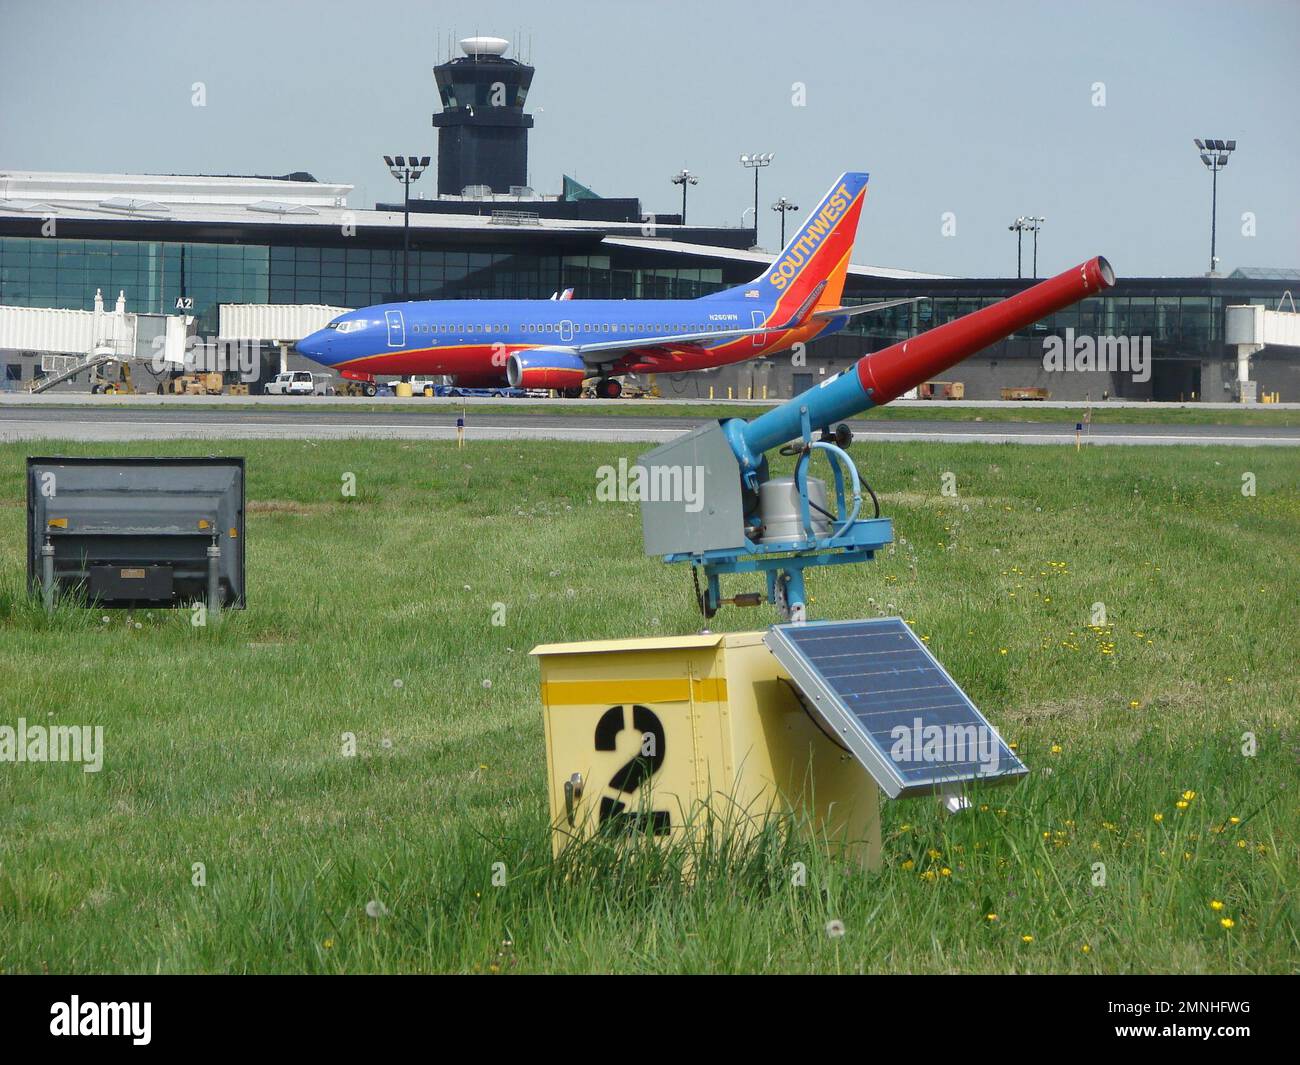 Propane cannons, like the one used in this airport, are also used at agricultural fields, and other areas to disperse wildlife (primarily birds) away from damage situations. Some have timers that automatically turn them on and off each day or have remote-controlled activators. Stock Photo